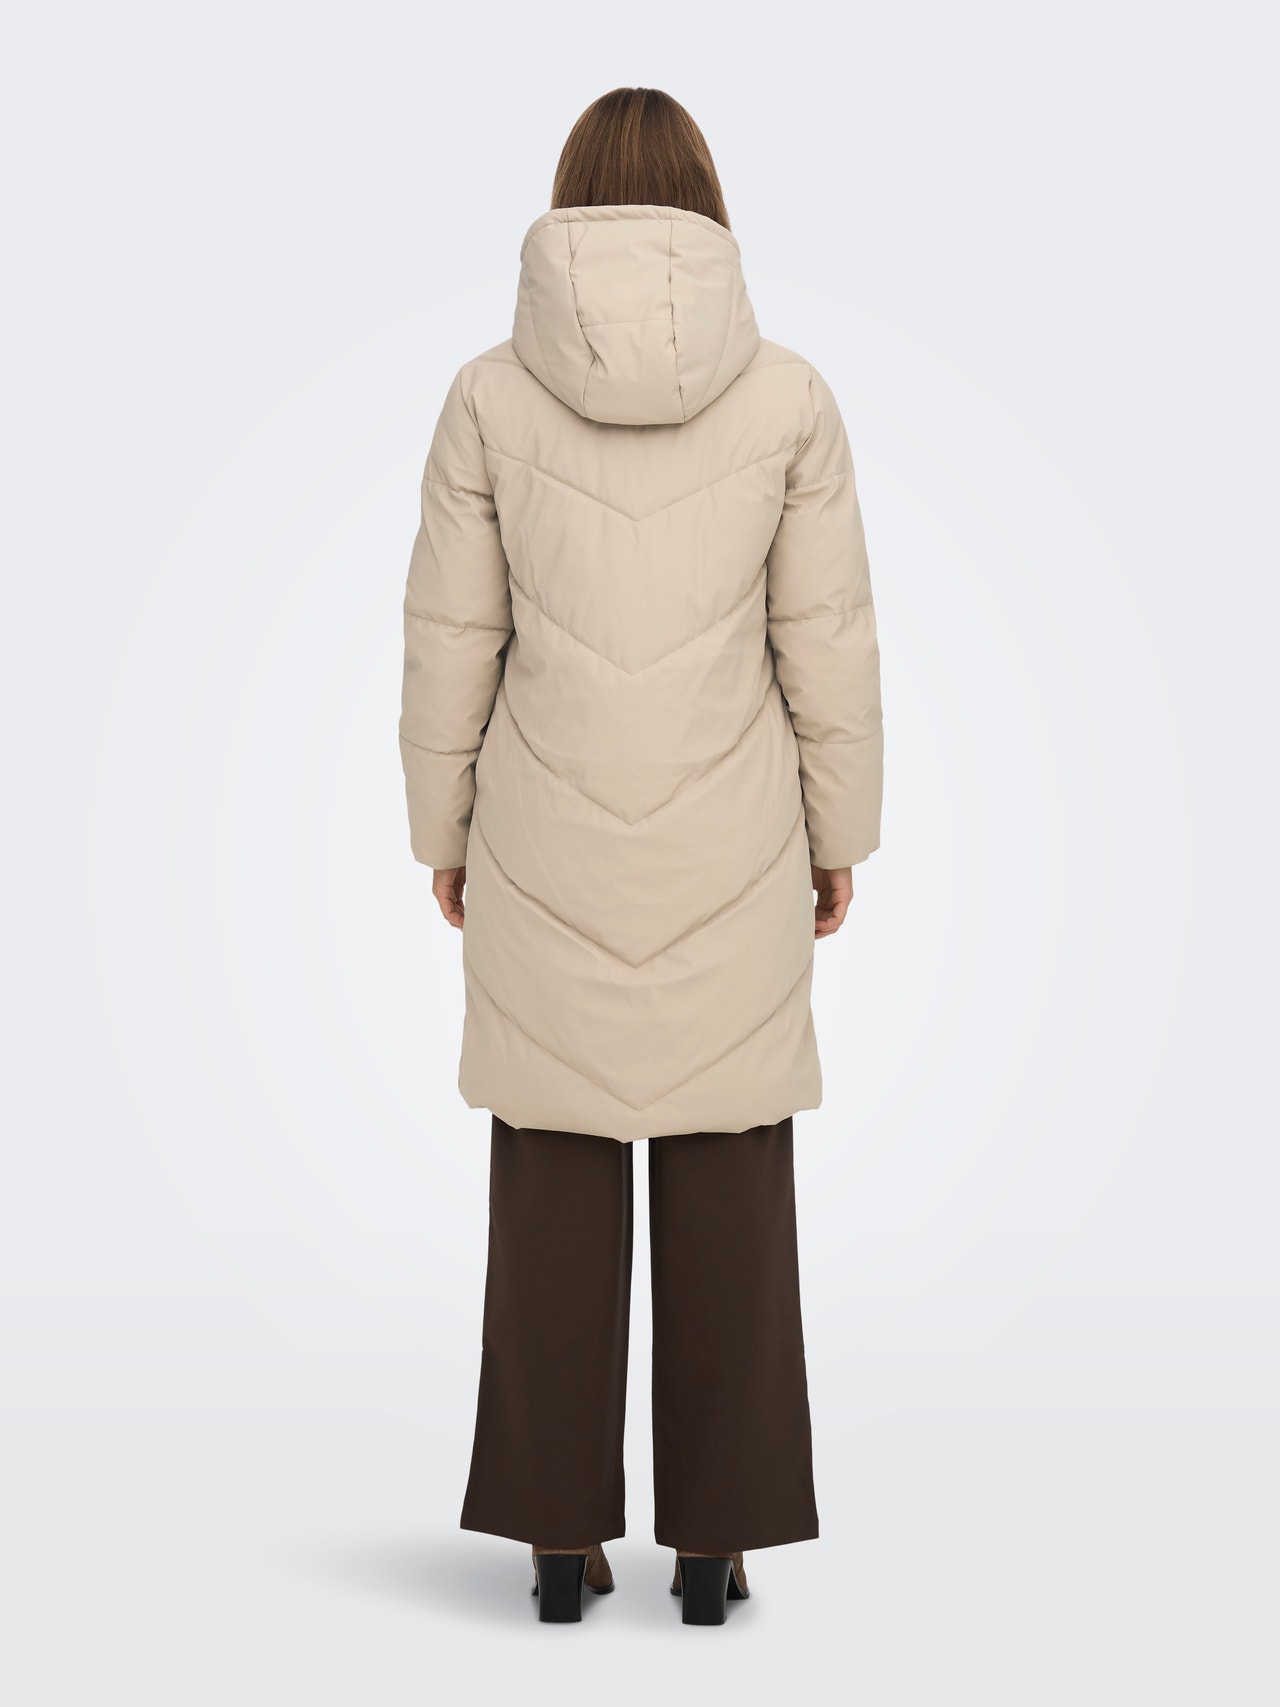 ONLY Manteaux Capuche -Simply Taupe - 15217556